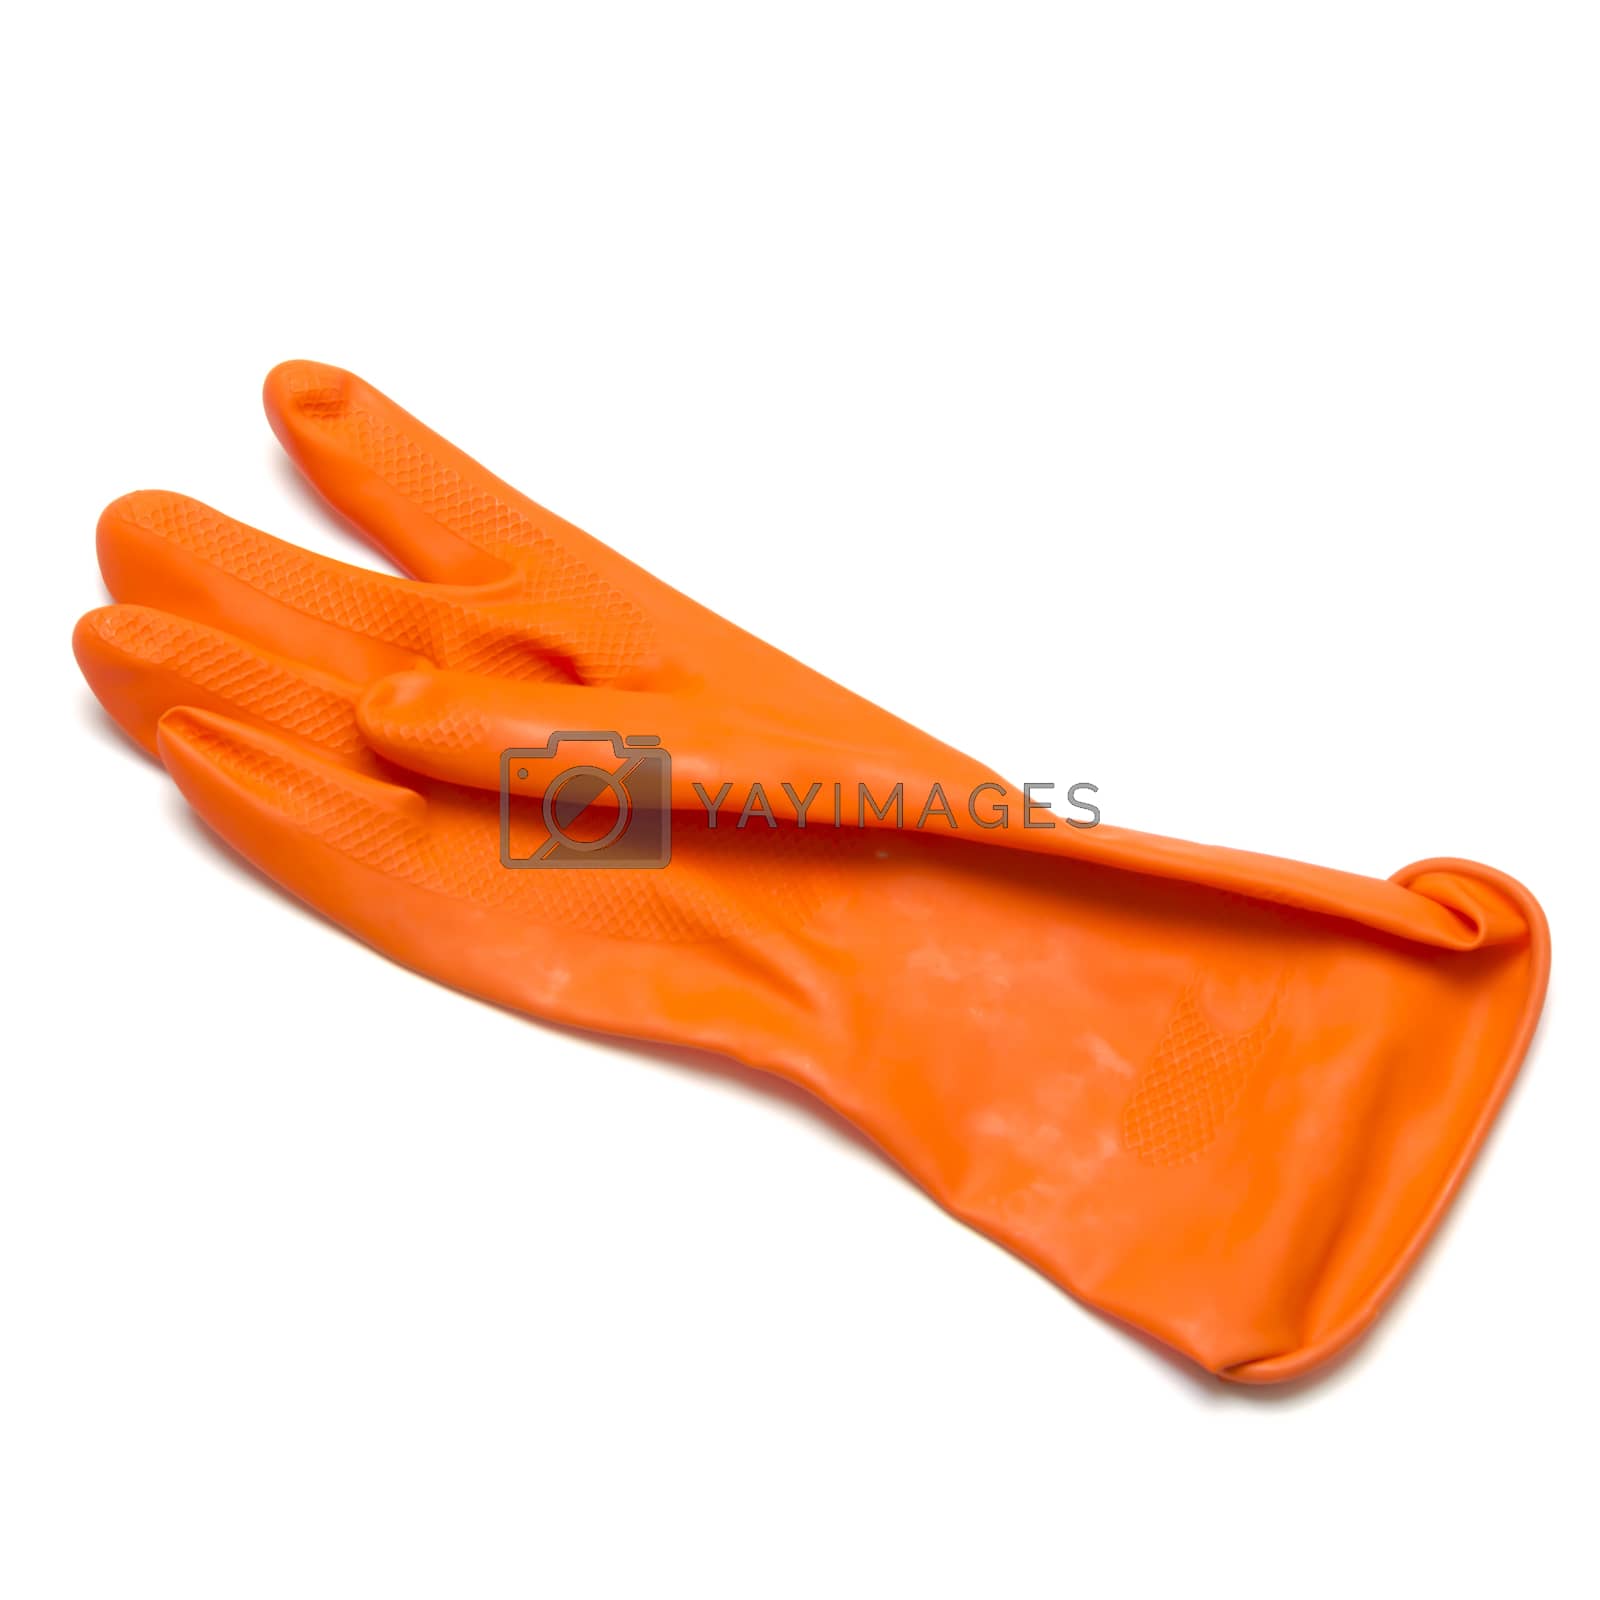 Royalty free image of orange cleaning glove by ammza12